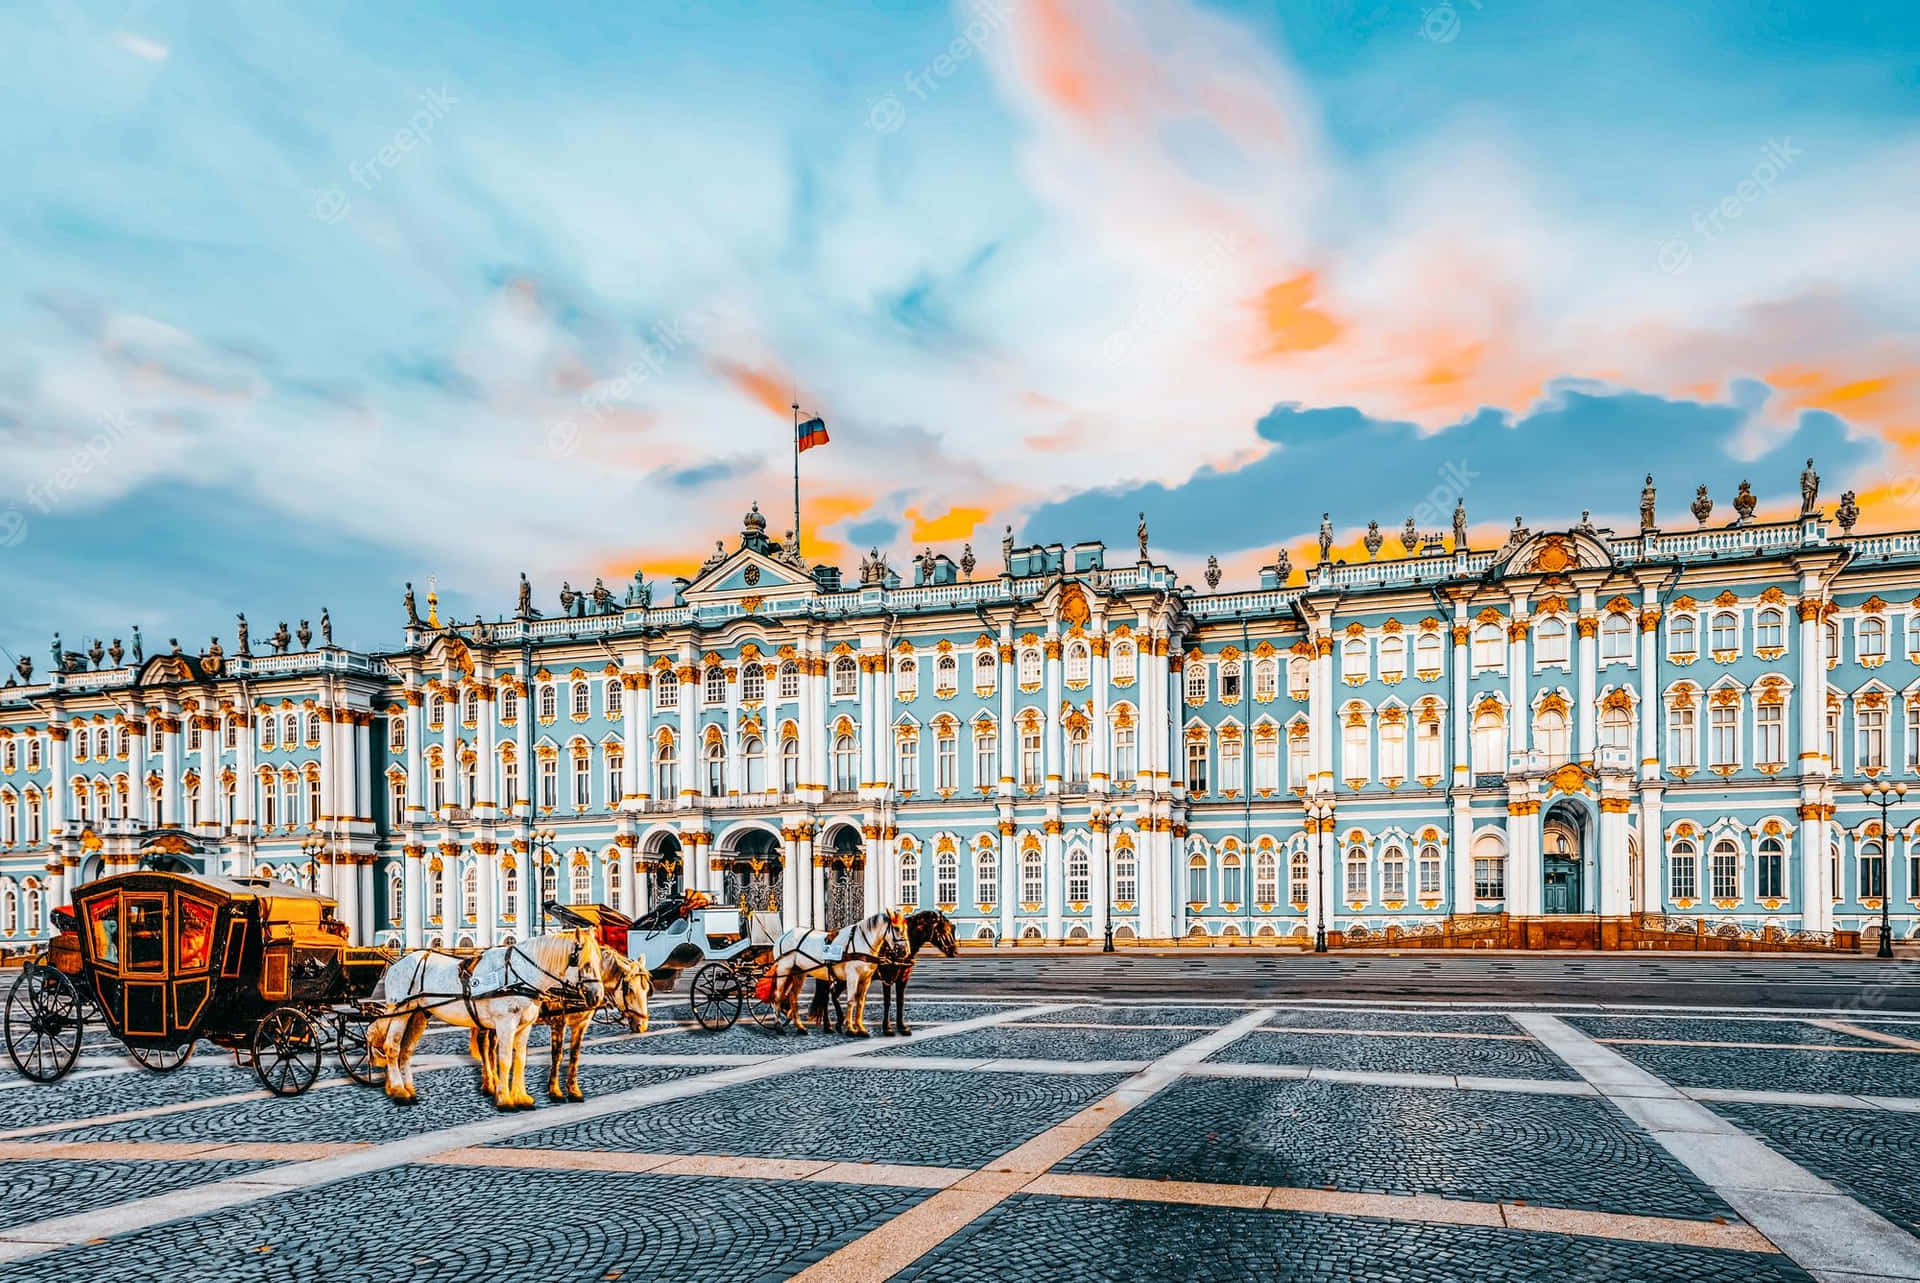 Majestic View of Chariots outside Hermitage Museum Wallpaper